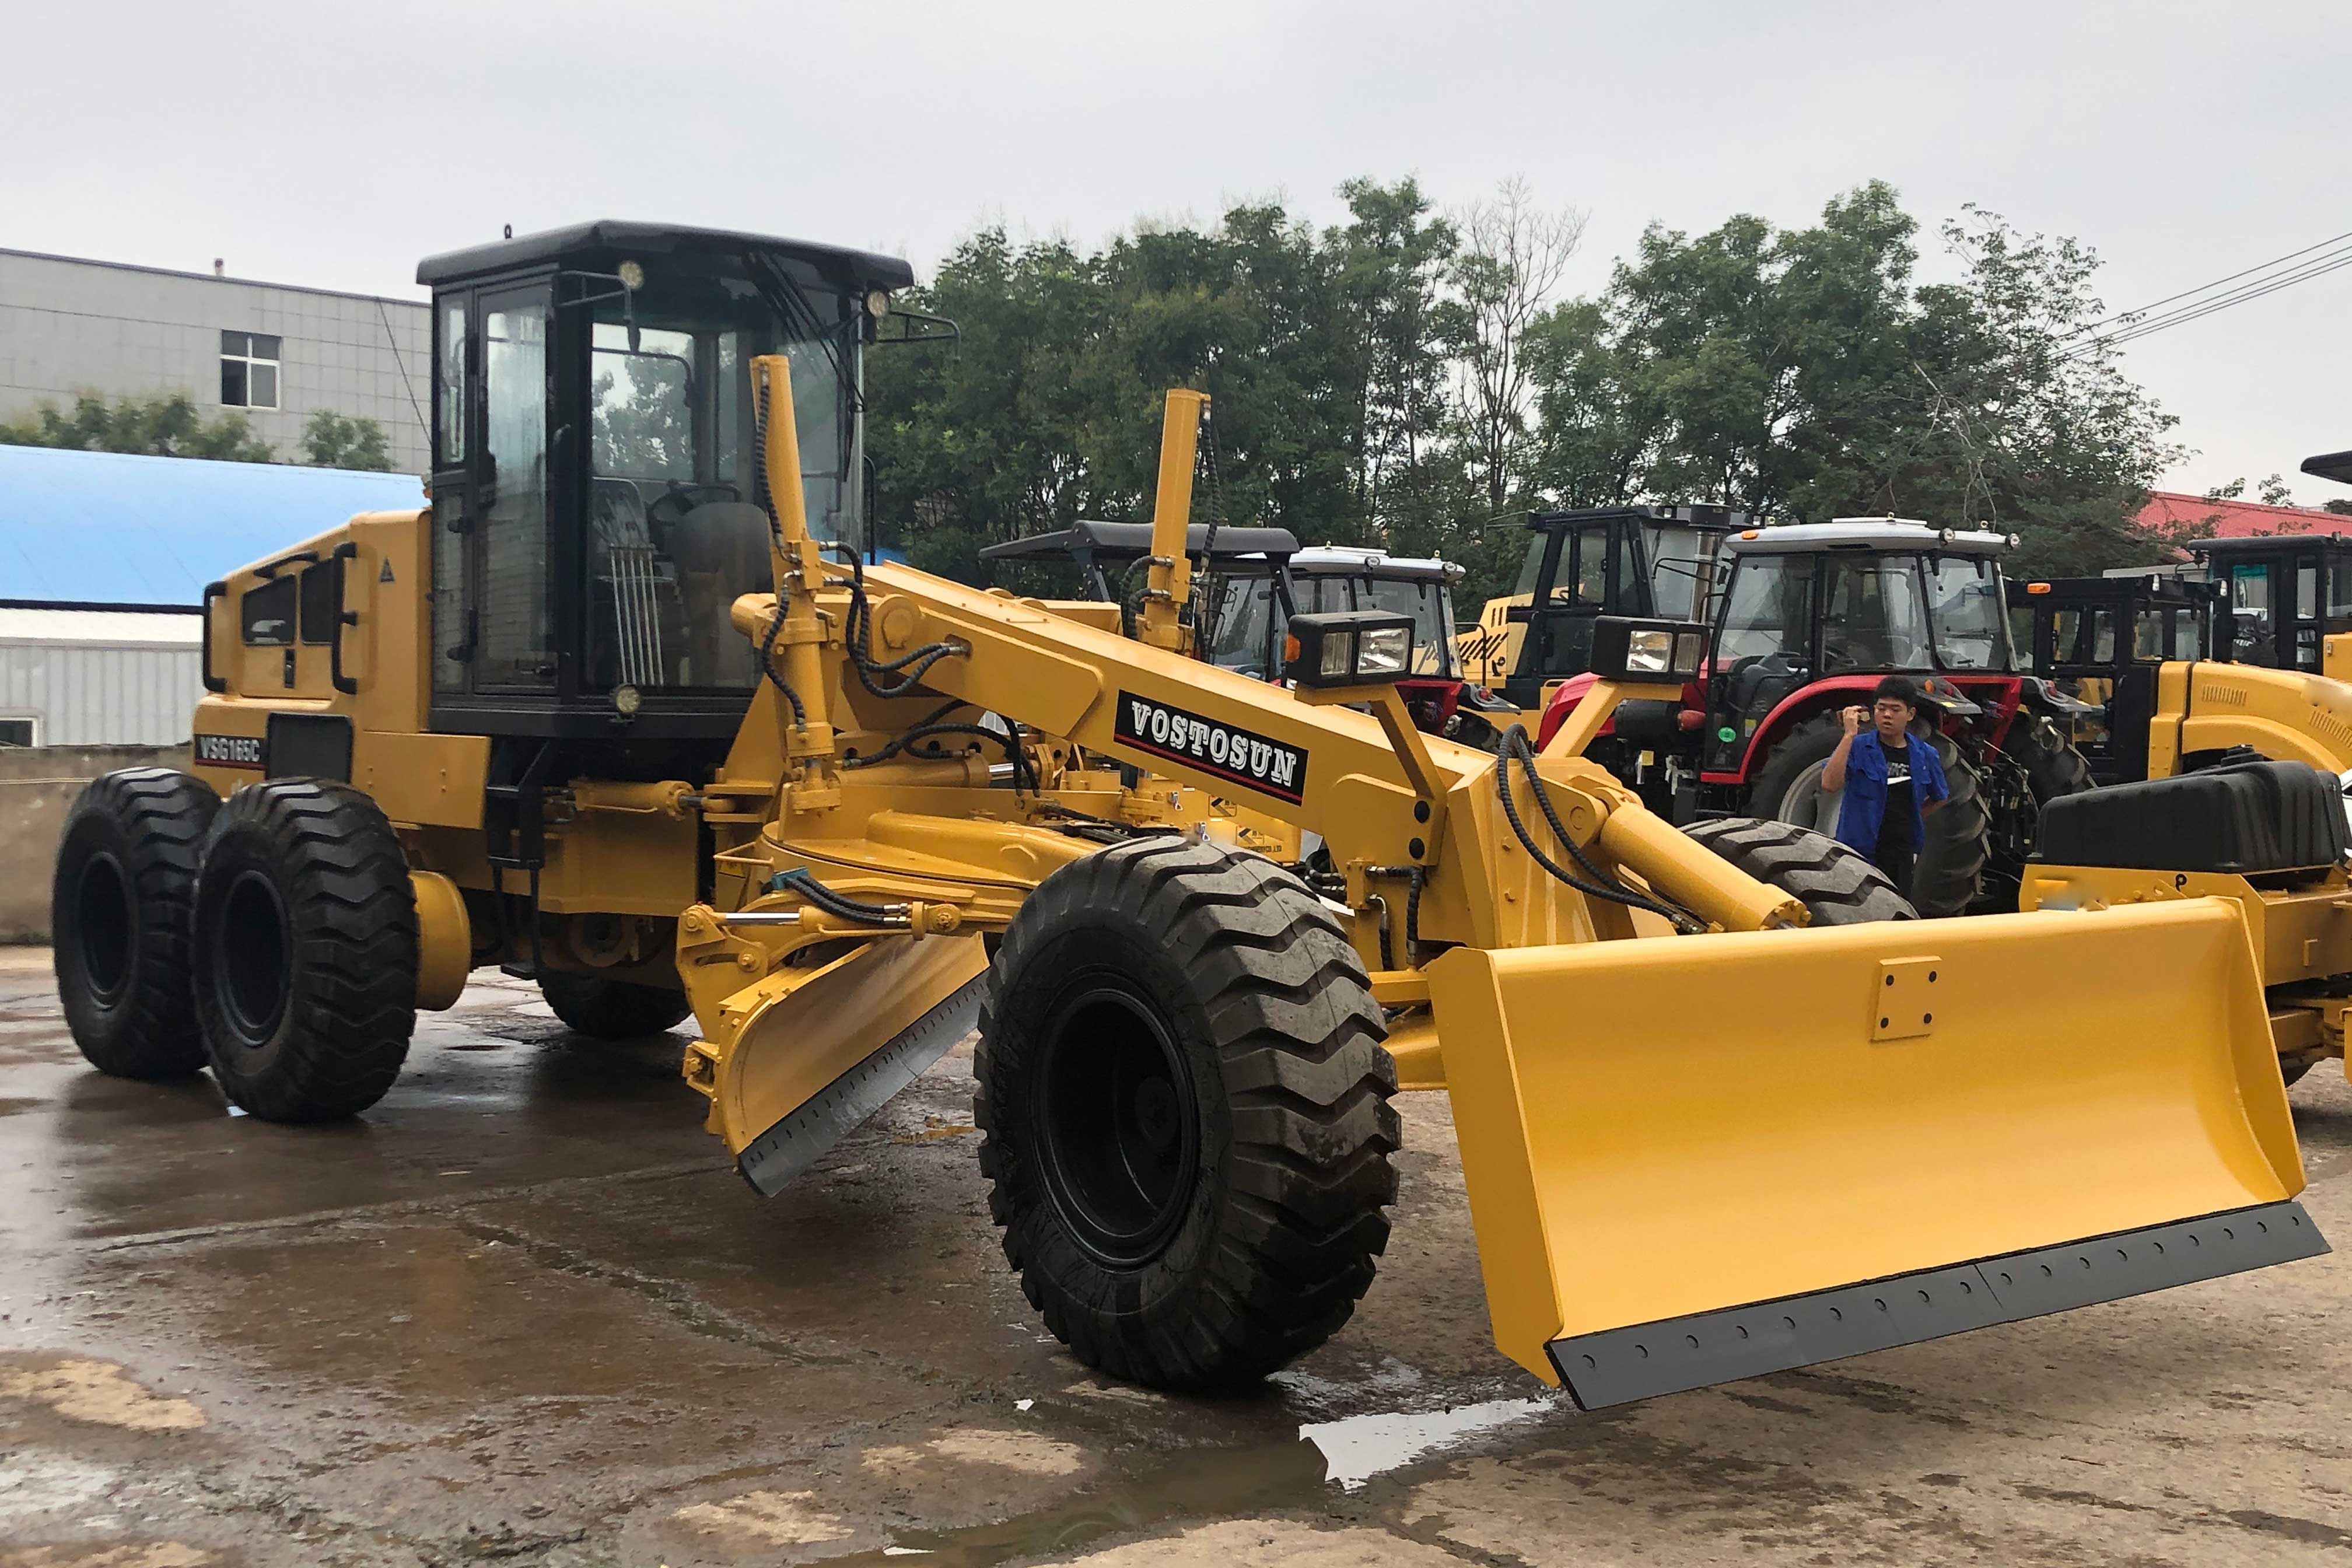 On August 27, 2020, VOSTOSUN’s motor grader were packed and transported to Ukraine.